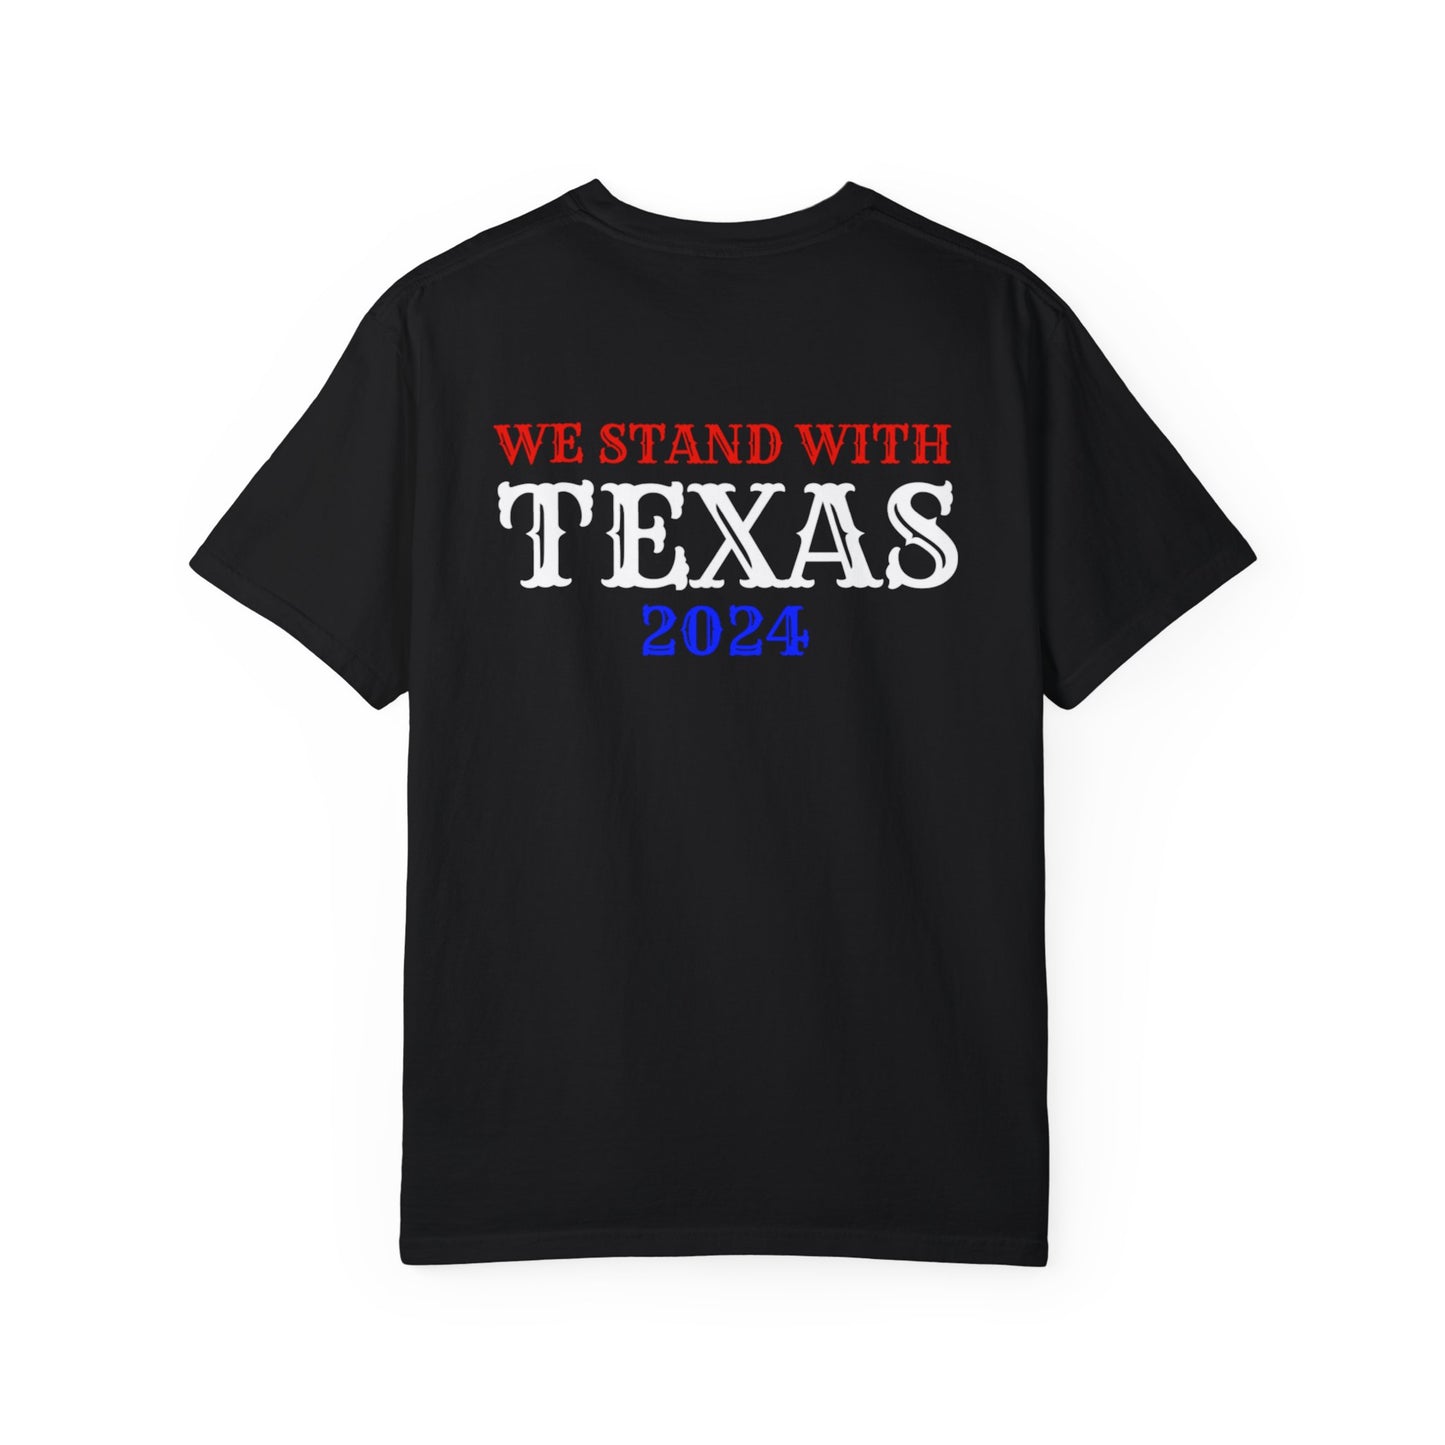 We Stand With Texas T-Shirt